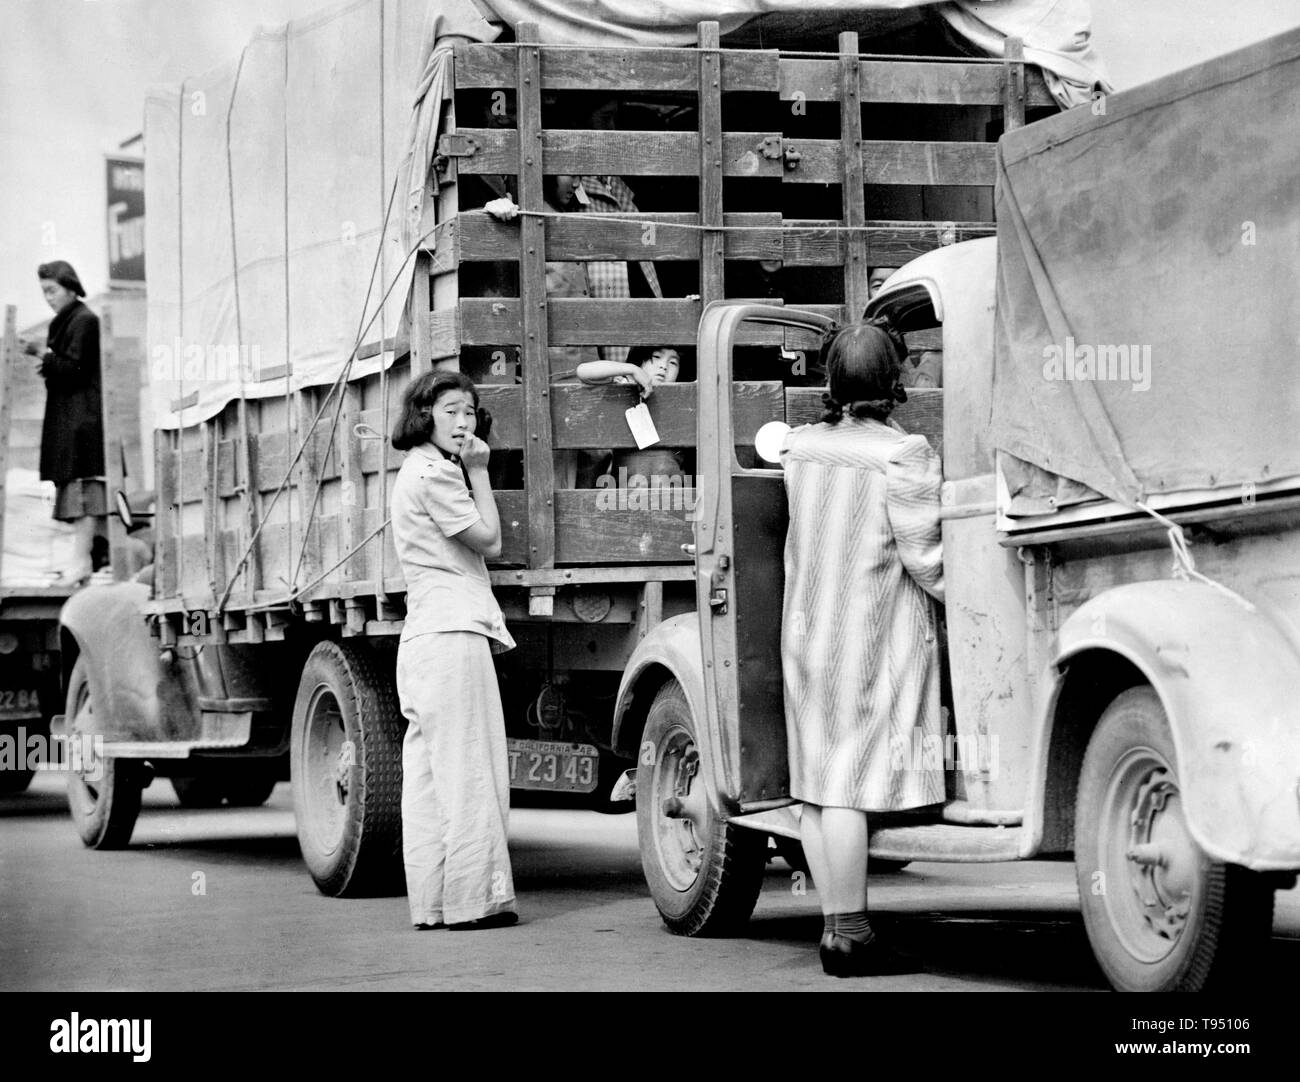 Entitled: 'The last Redondo Beach residents of Japanese ancestry leaving by truck for relocation.' The internment of Japanese-Americans during WWII was the forced relocation and incarceration in camps of 110,000-120,000 people of Japanese ancestry (62% of the internees were US citizens) ordered by President Roosevelt shortly after Japan's attack on Pearl Harbor. Japanese-Americans were incarcerated based on local population concentrations and regional politics. Stock Photo